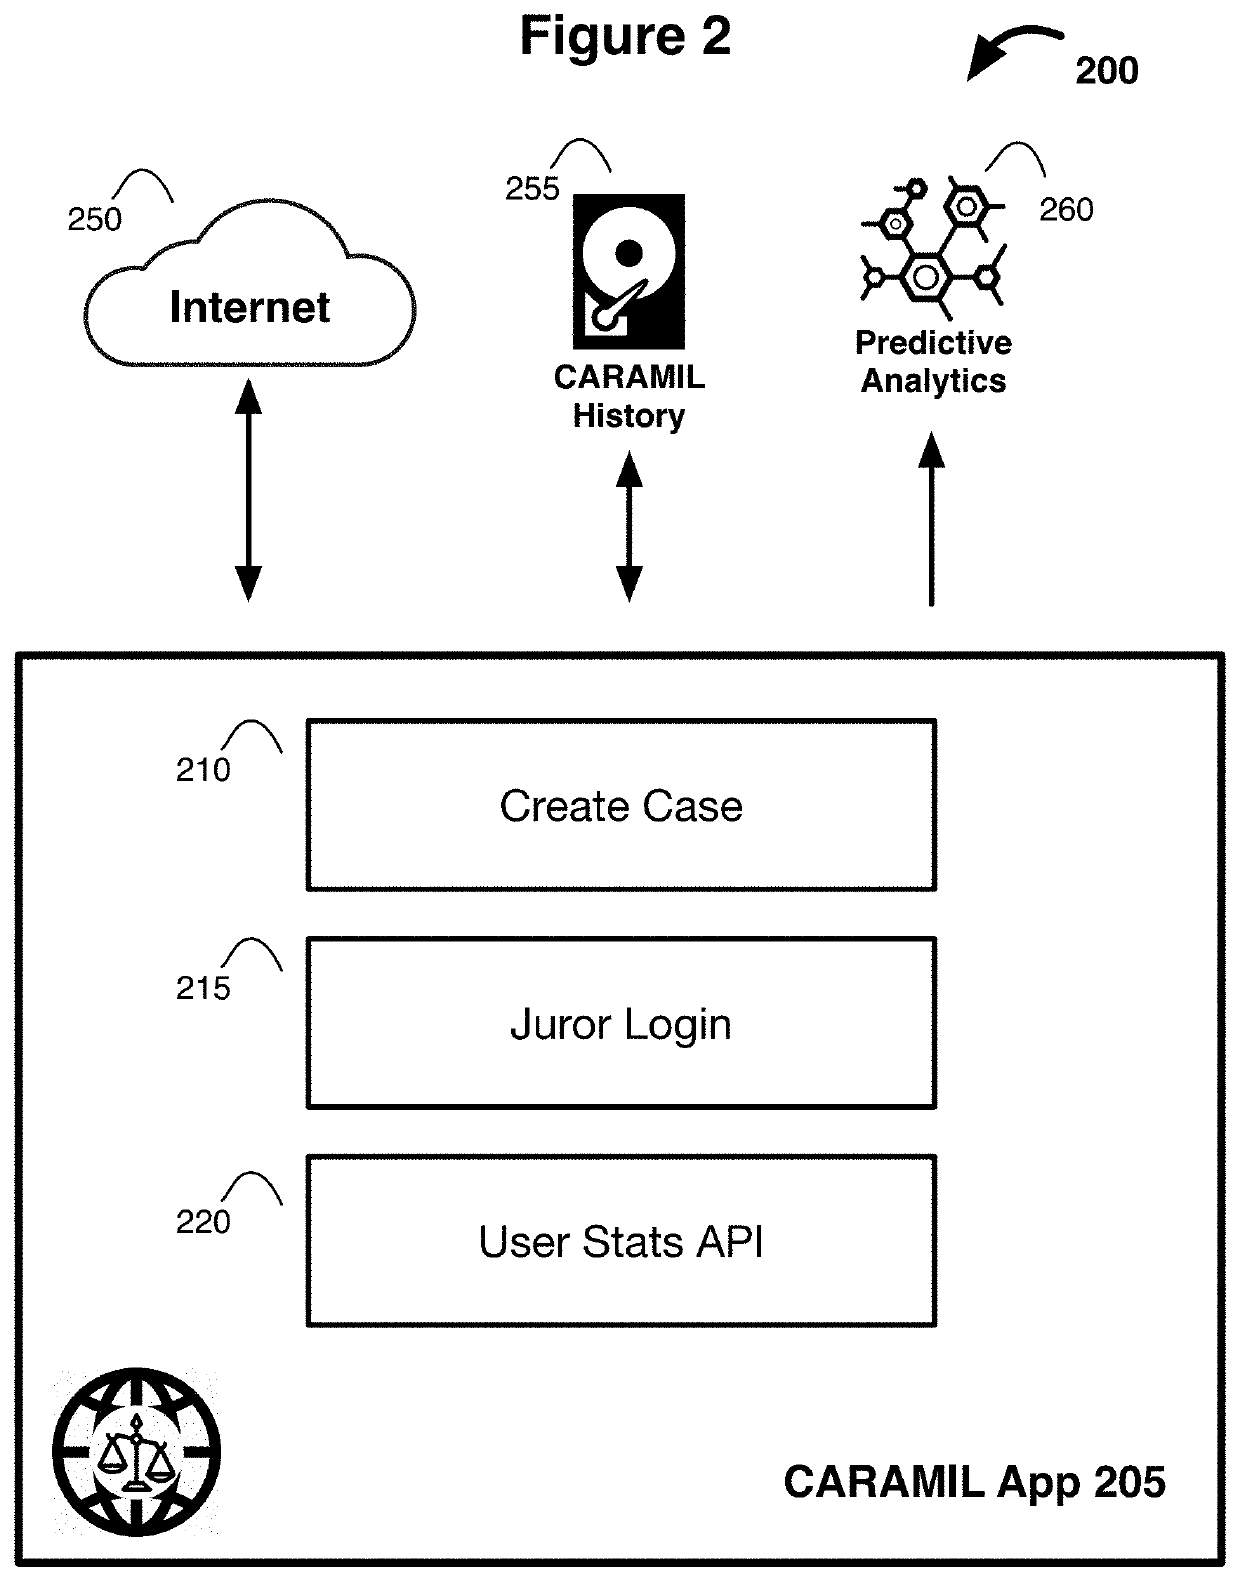 Methods for arbitrating online disputes and anticipating outcomes using machine intelligence